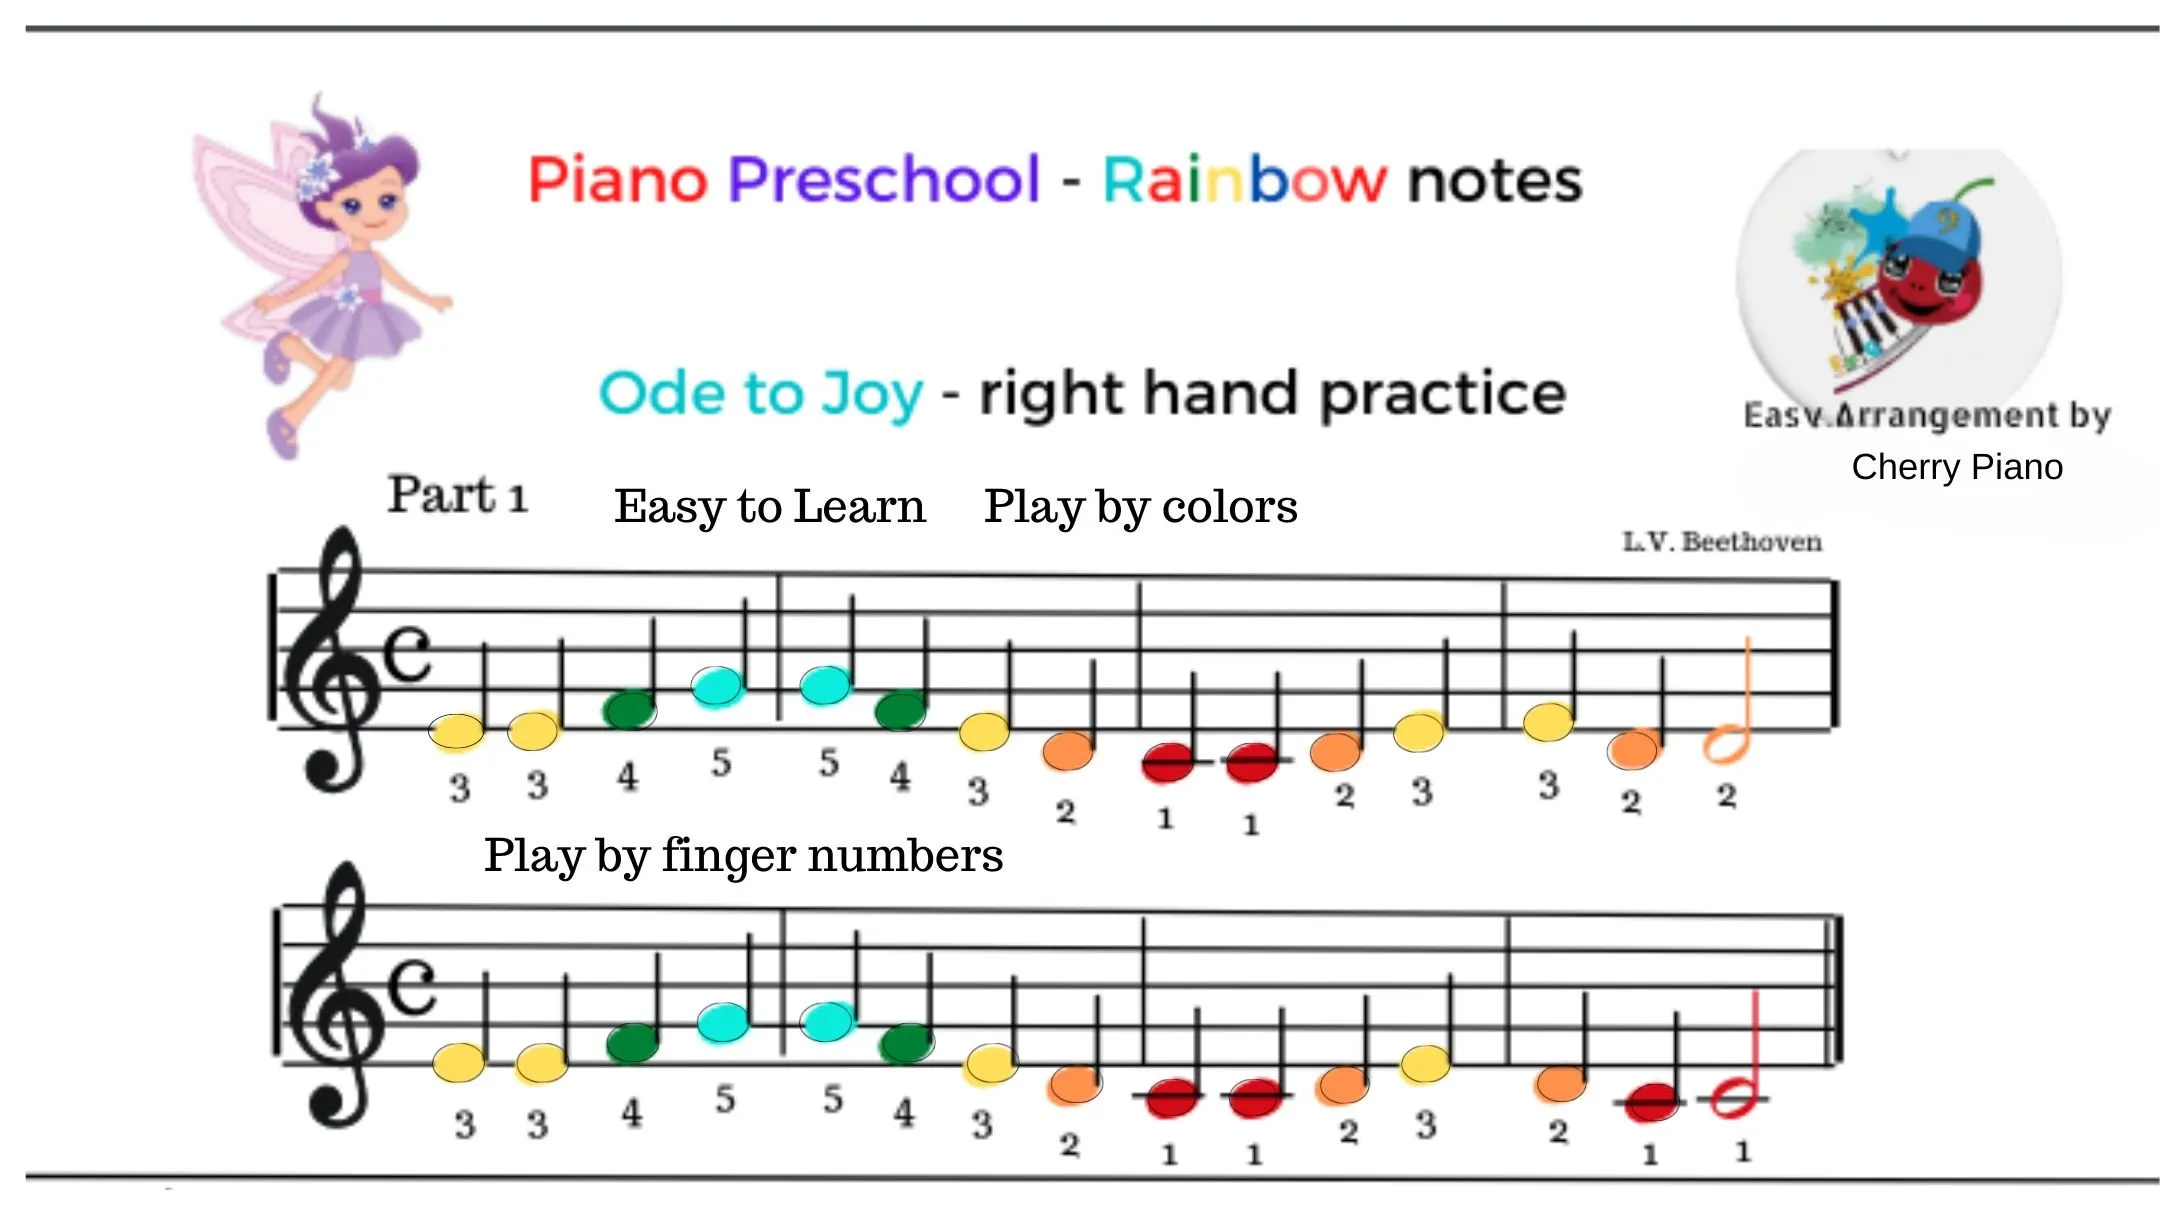 Ode to joy Beethoven Rainbow notes